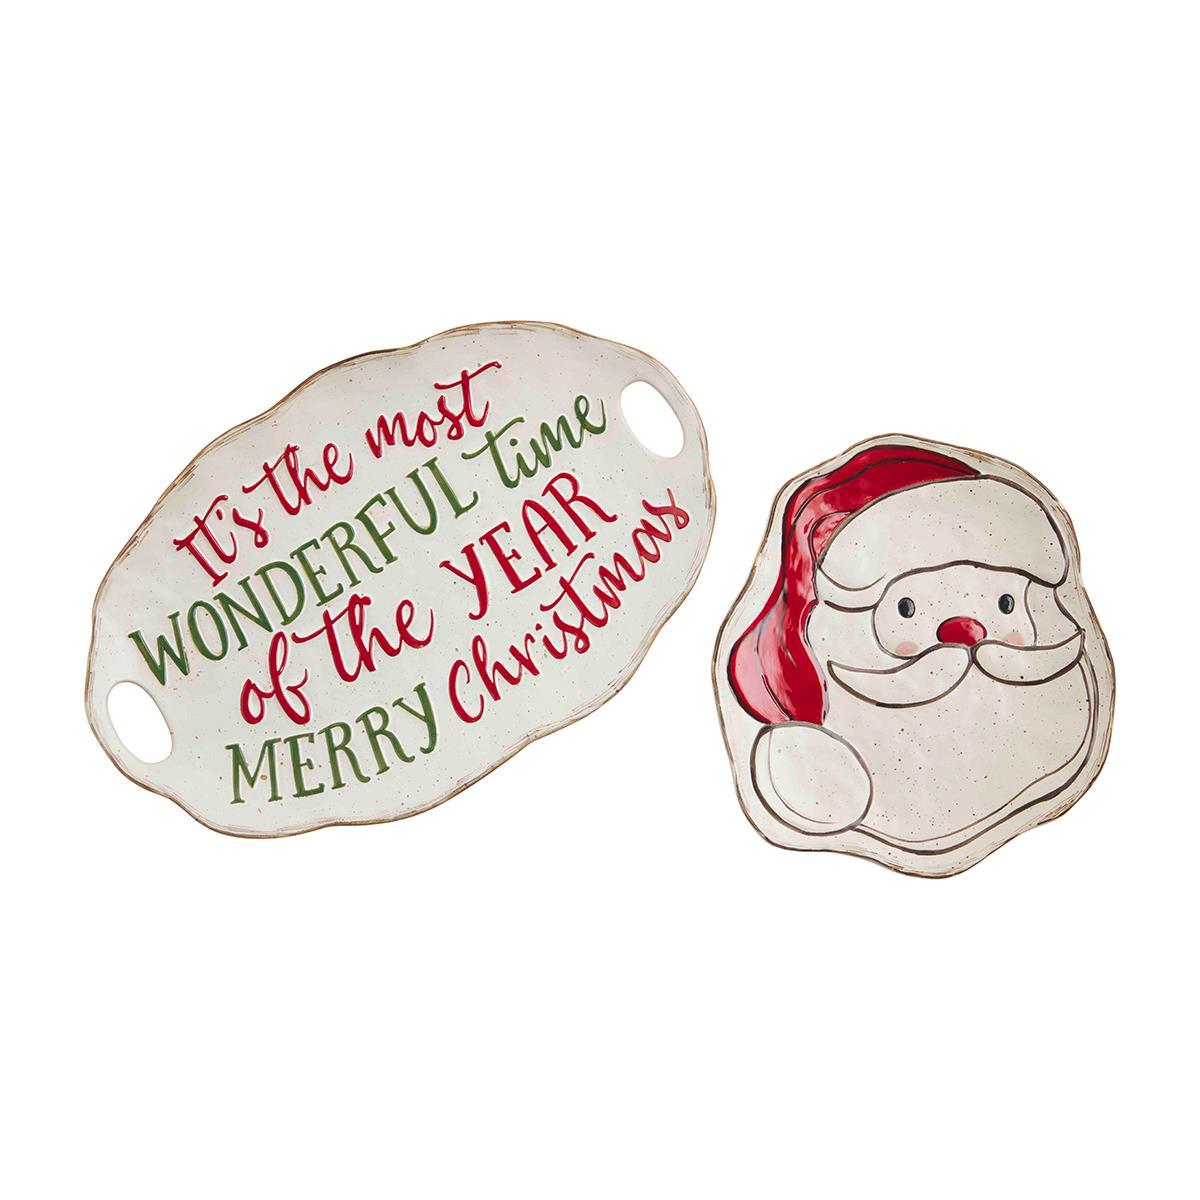 large ceramic oval platter sentiment in red and green script lettering with handles and a ceramic santa face shaped platter on a white background